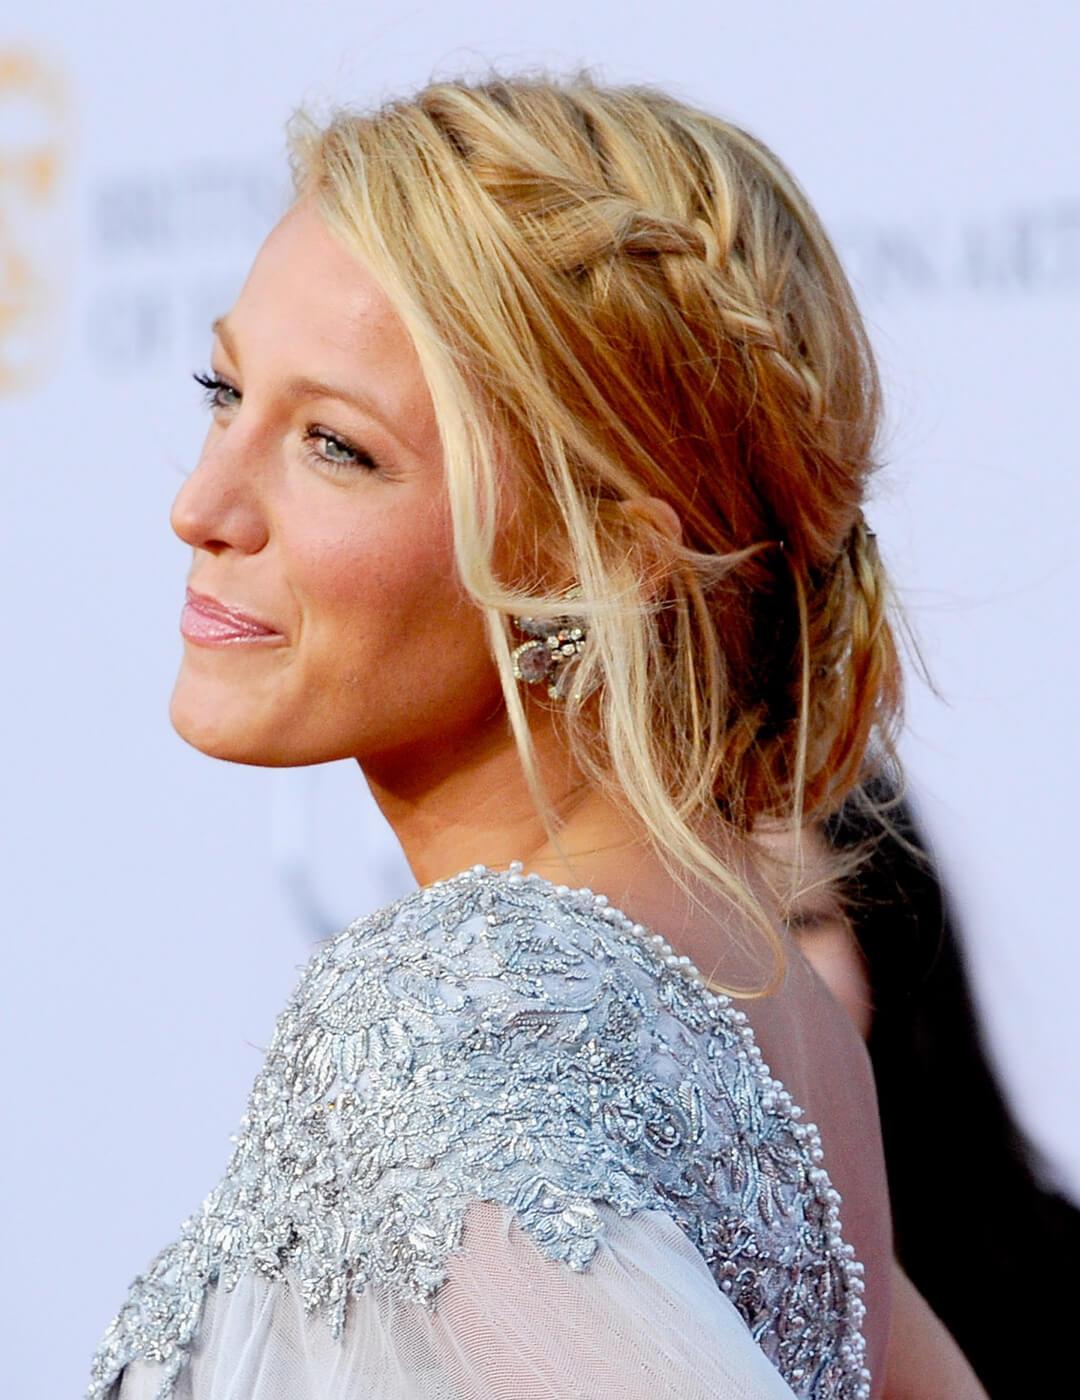 Blake Lively rocking a waterfall braided updo hairstyle and silver sequined dress